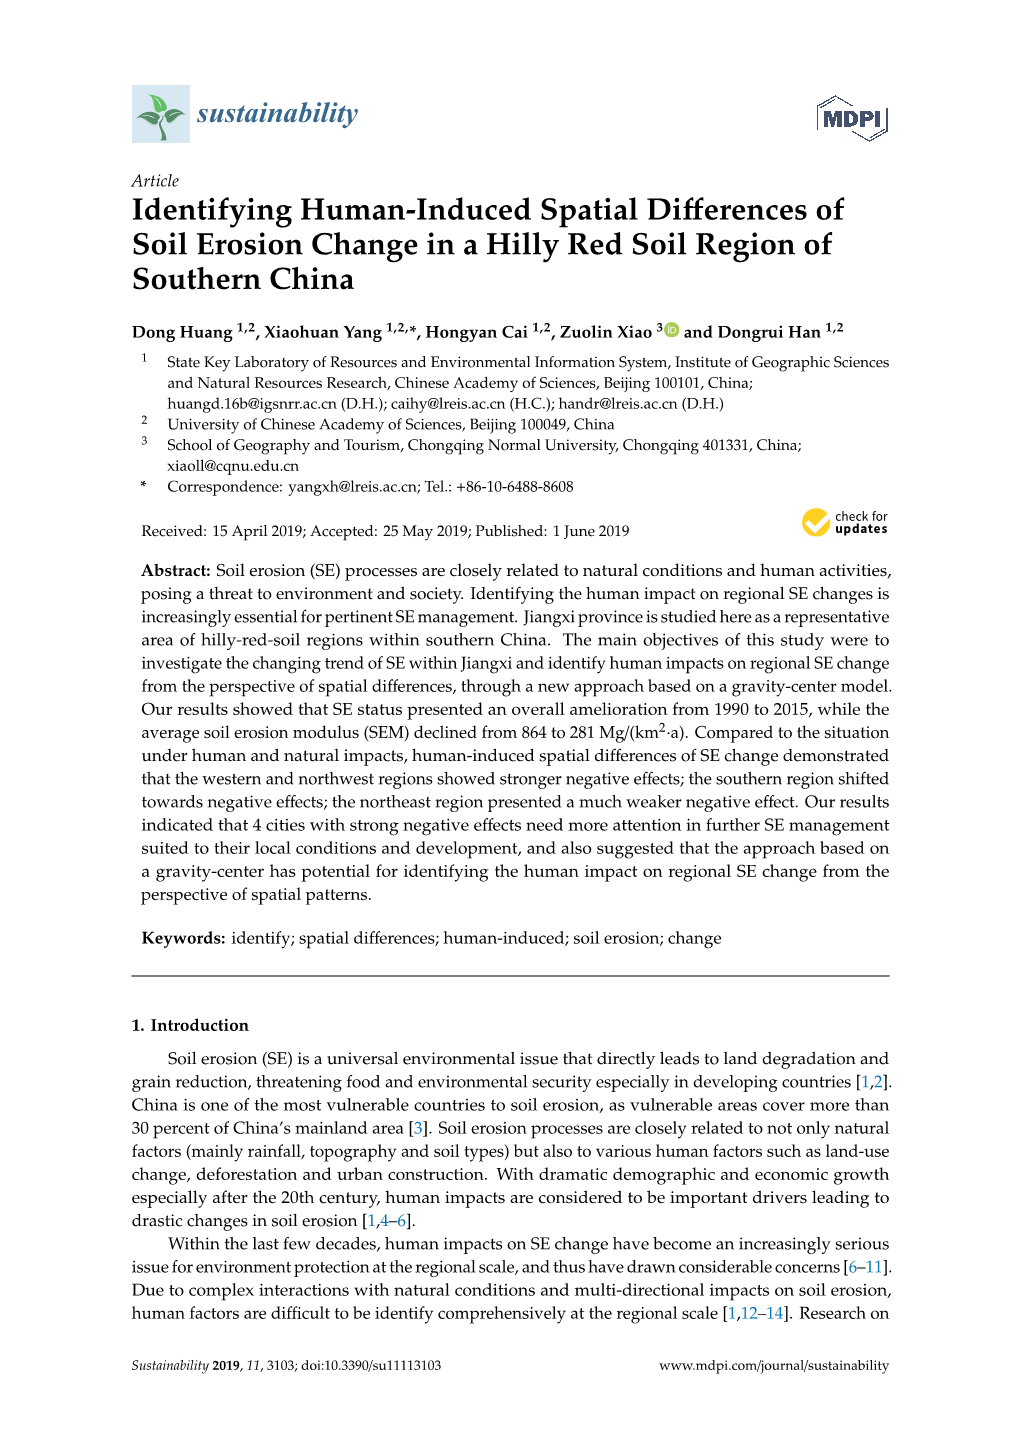 Identifying Human-Induced Spatial Differences of Soil Erosion